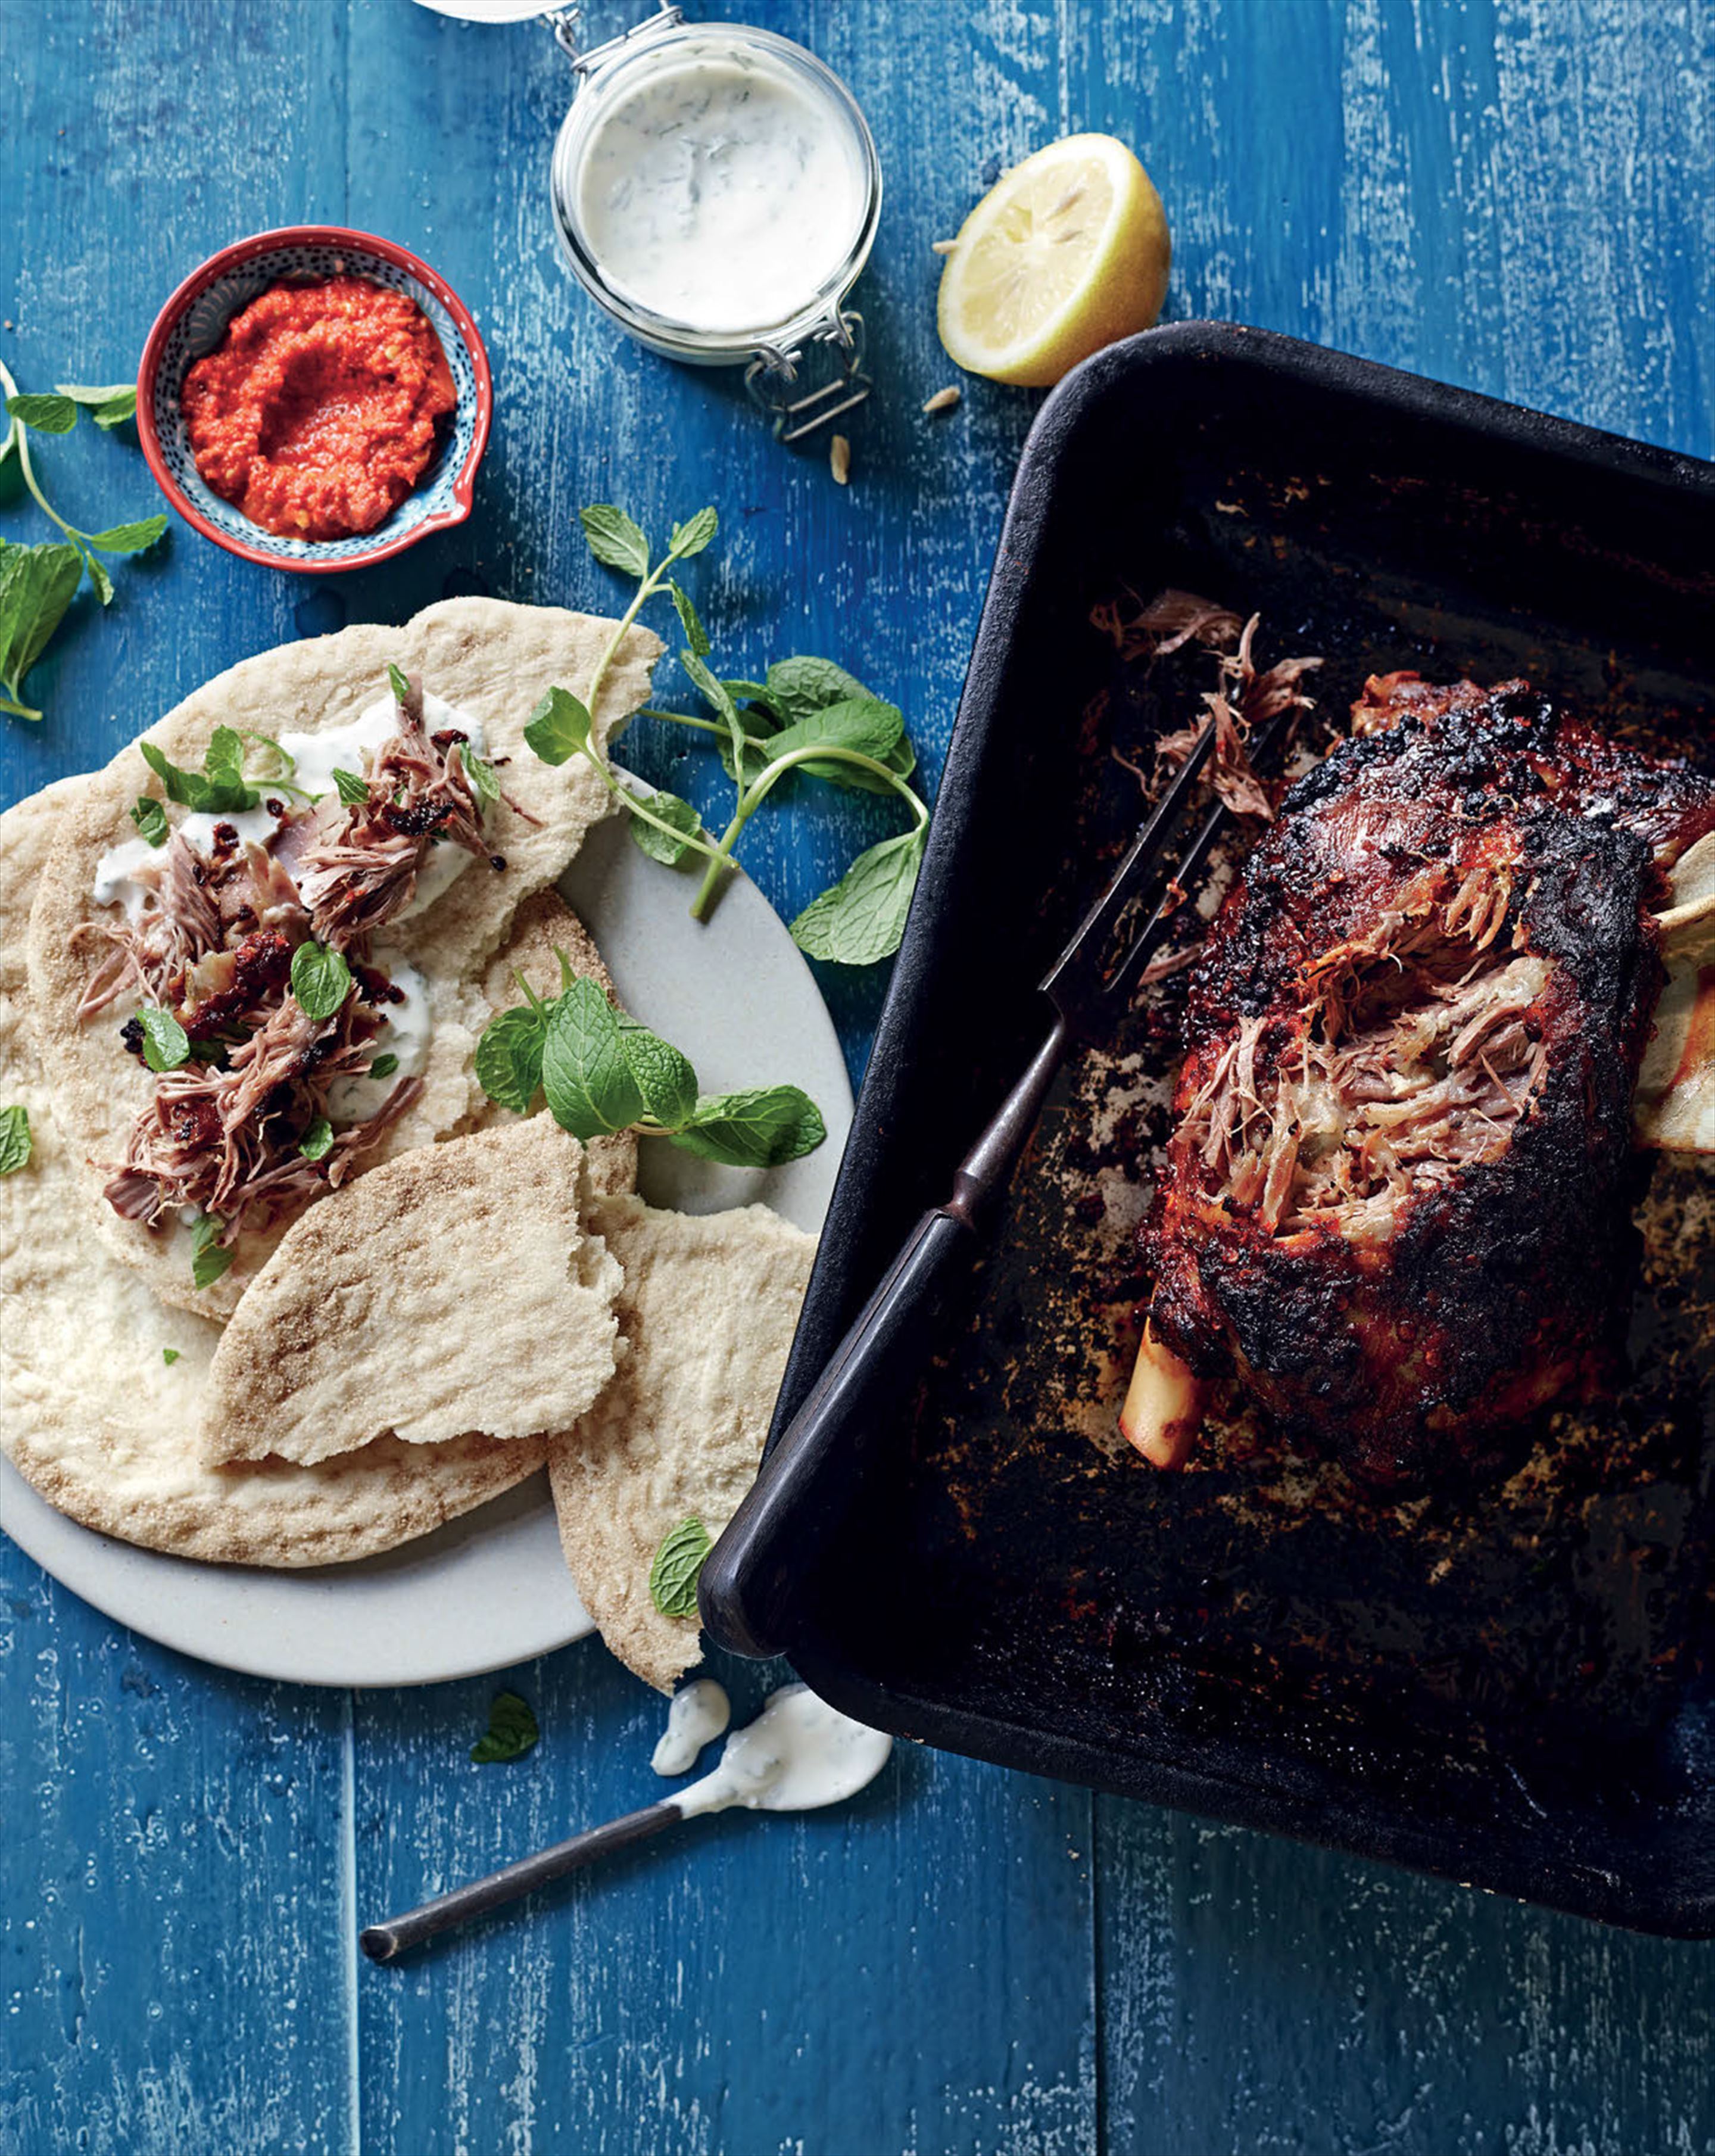 Slow-roasted lamb shoulder with harissa